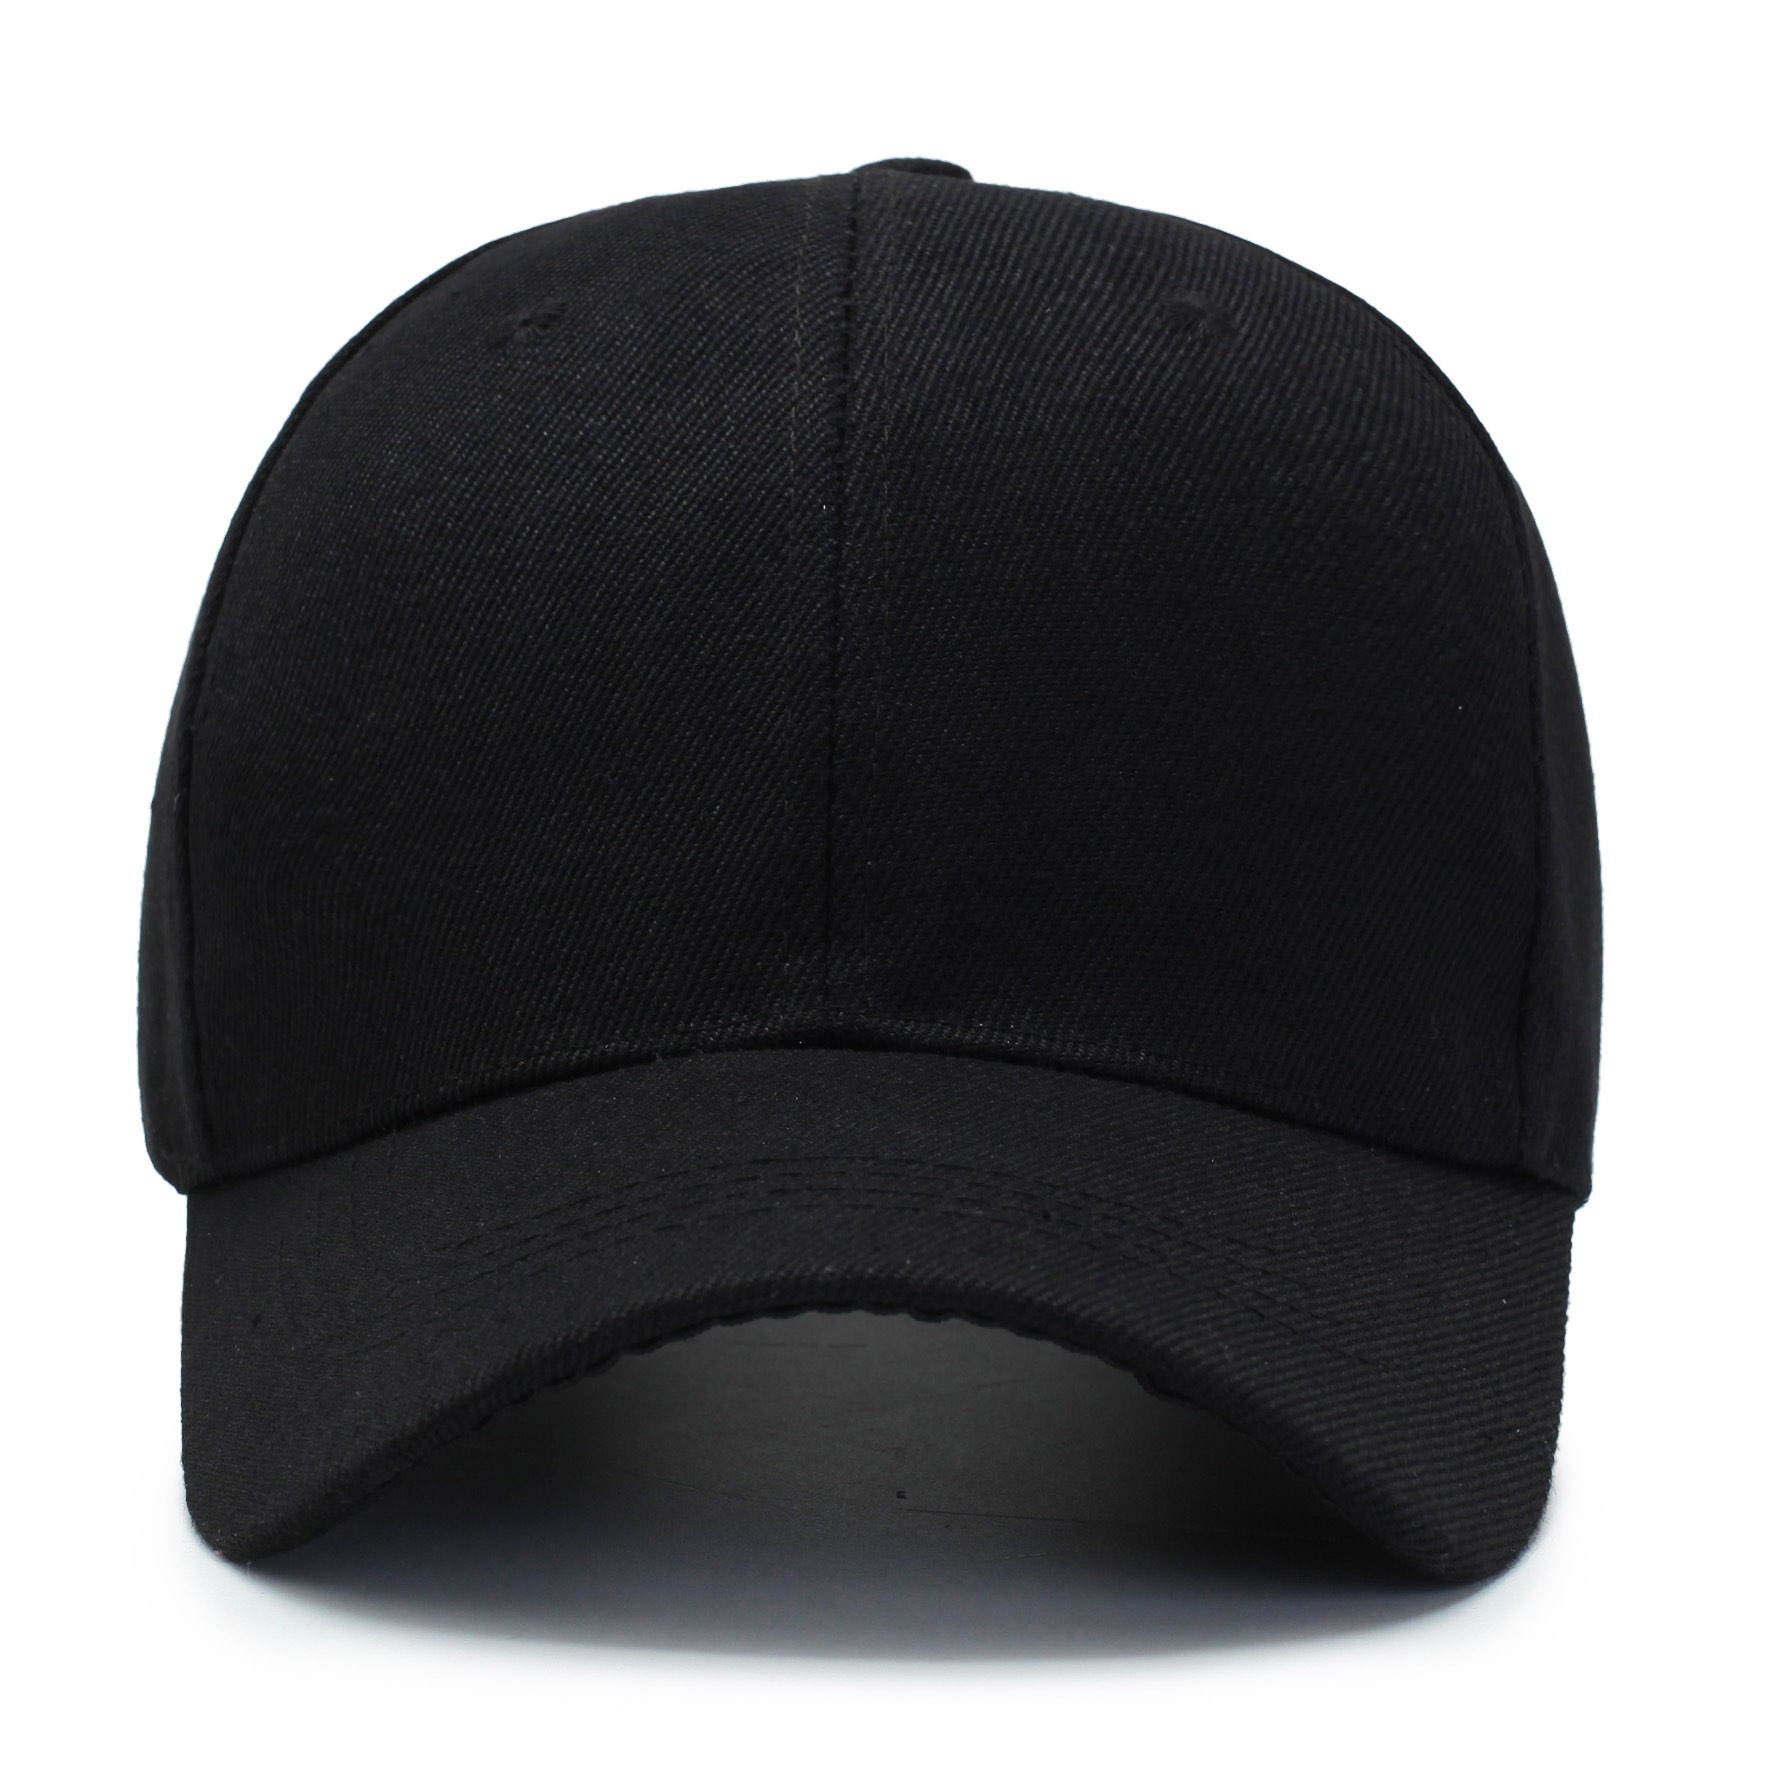 Hat Women's Solid Color Light Board Thickened Peaked Cap Outdoor Sun Hat Black White Fur Green Baseball Cap in Stock Wholesale